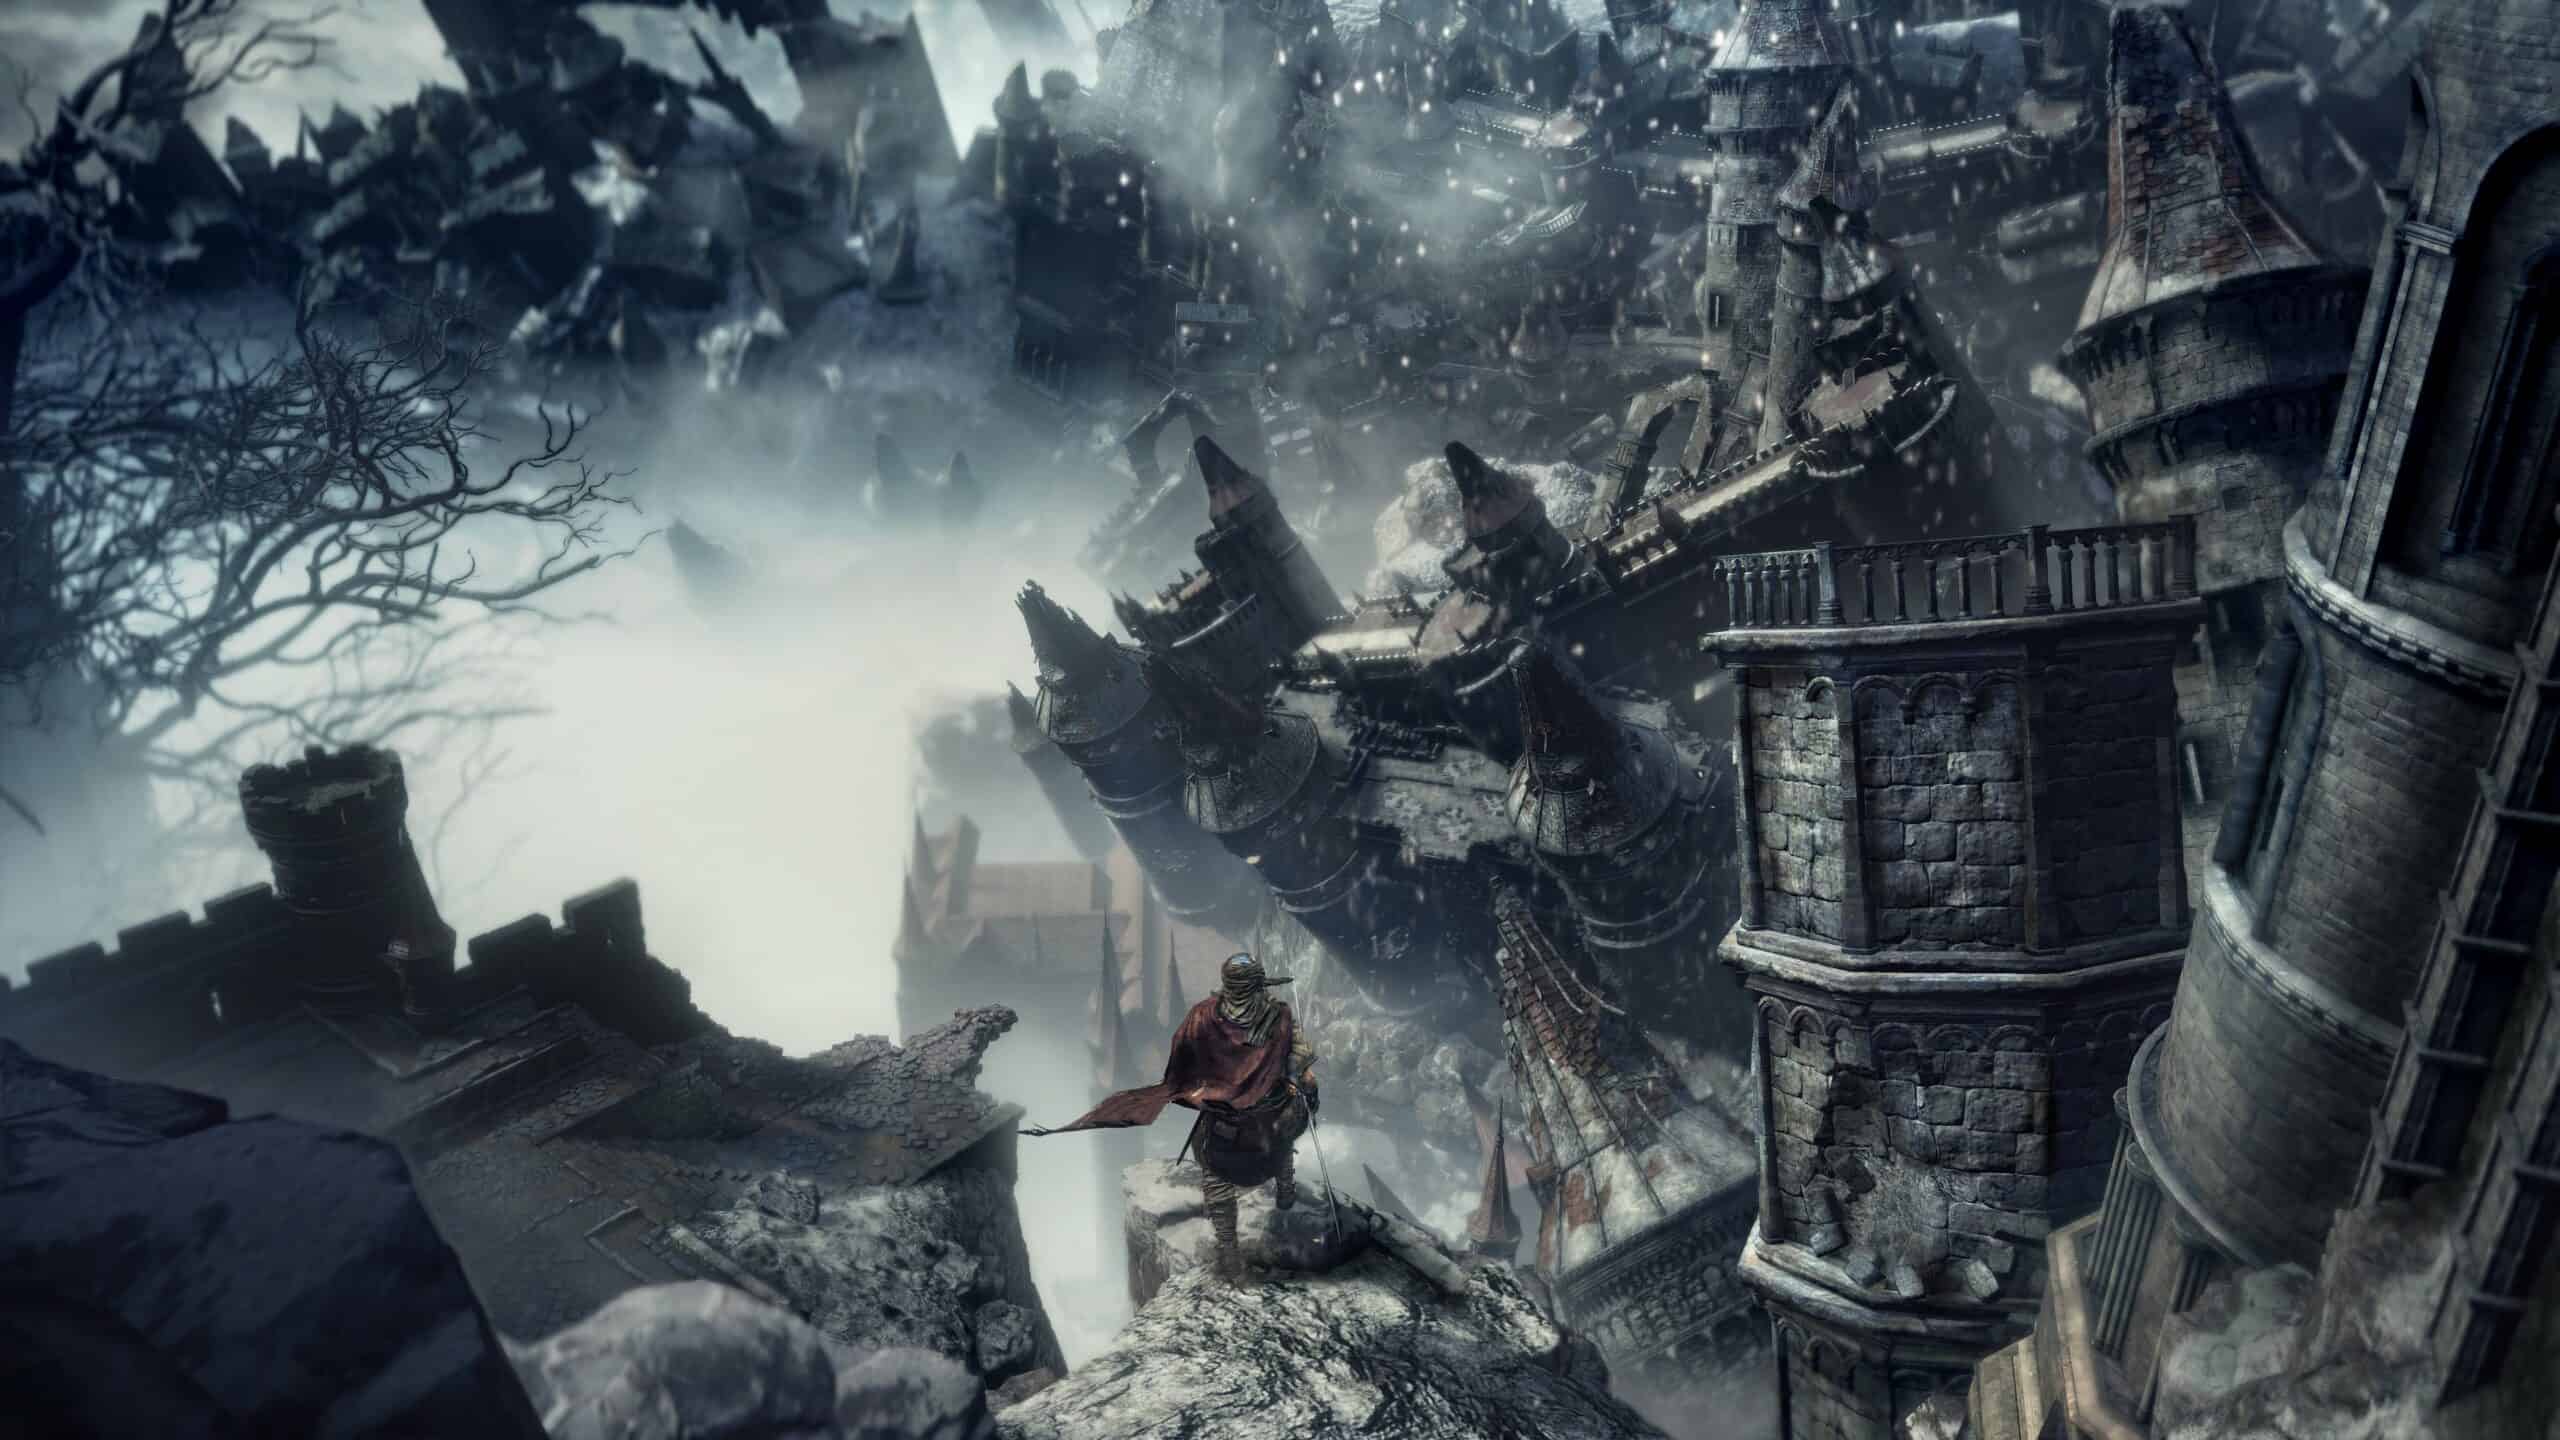 Dark Souls III: The Ringed City Cheats & Cheat Codes for Xbox One,  PlayStation 4, and PC - Cheat Code Central